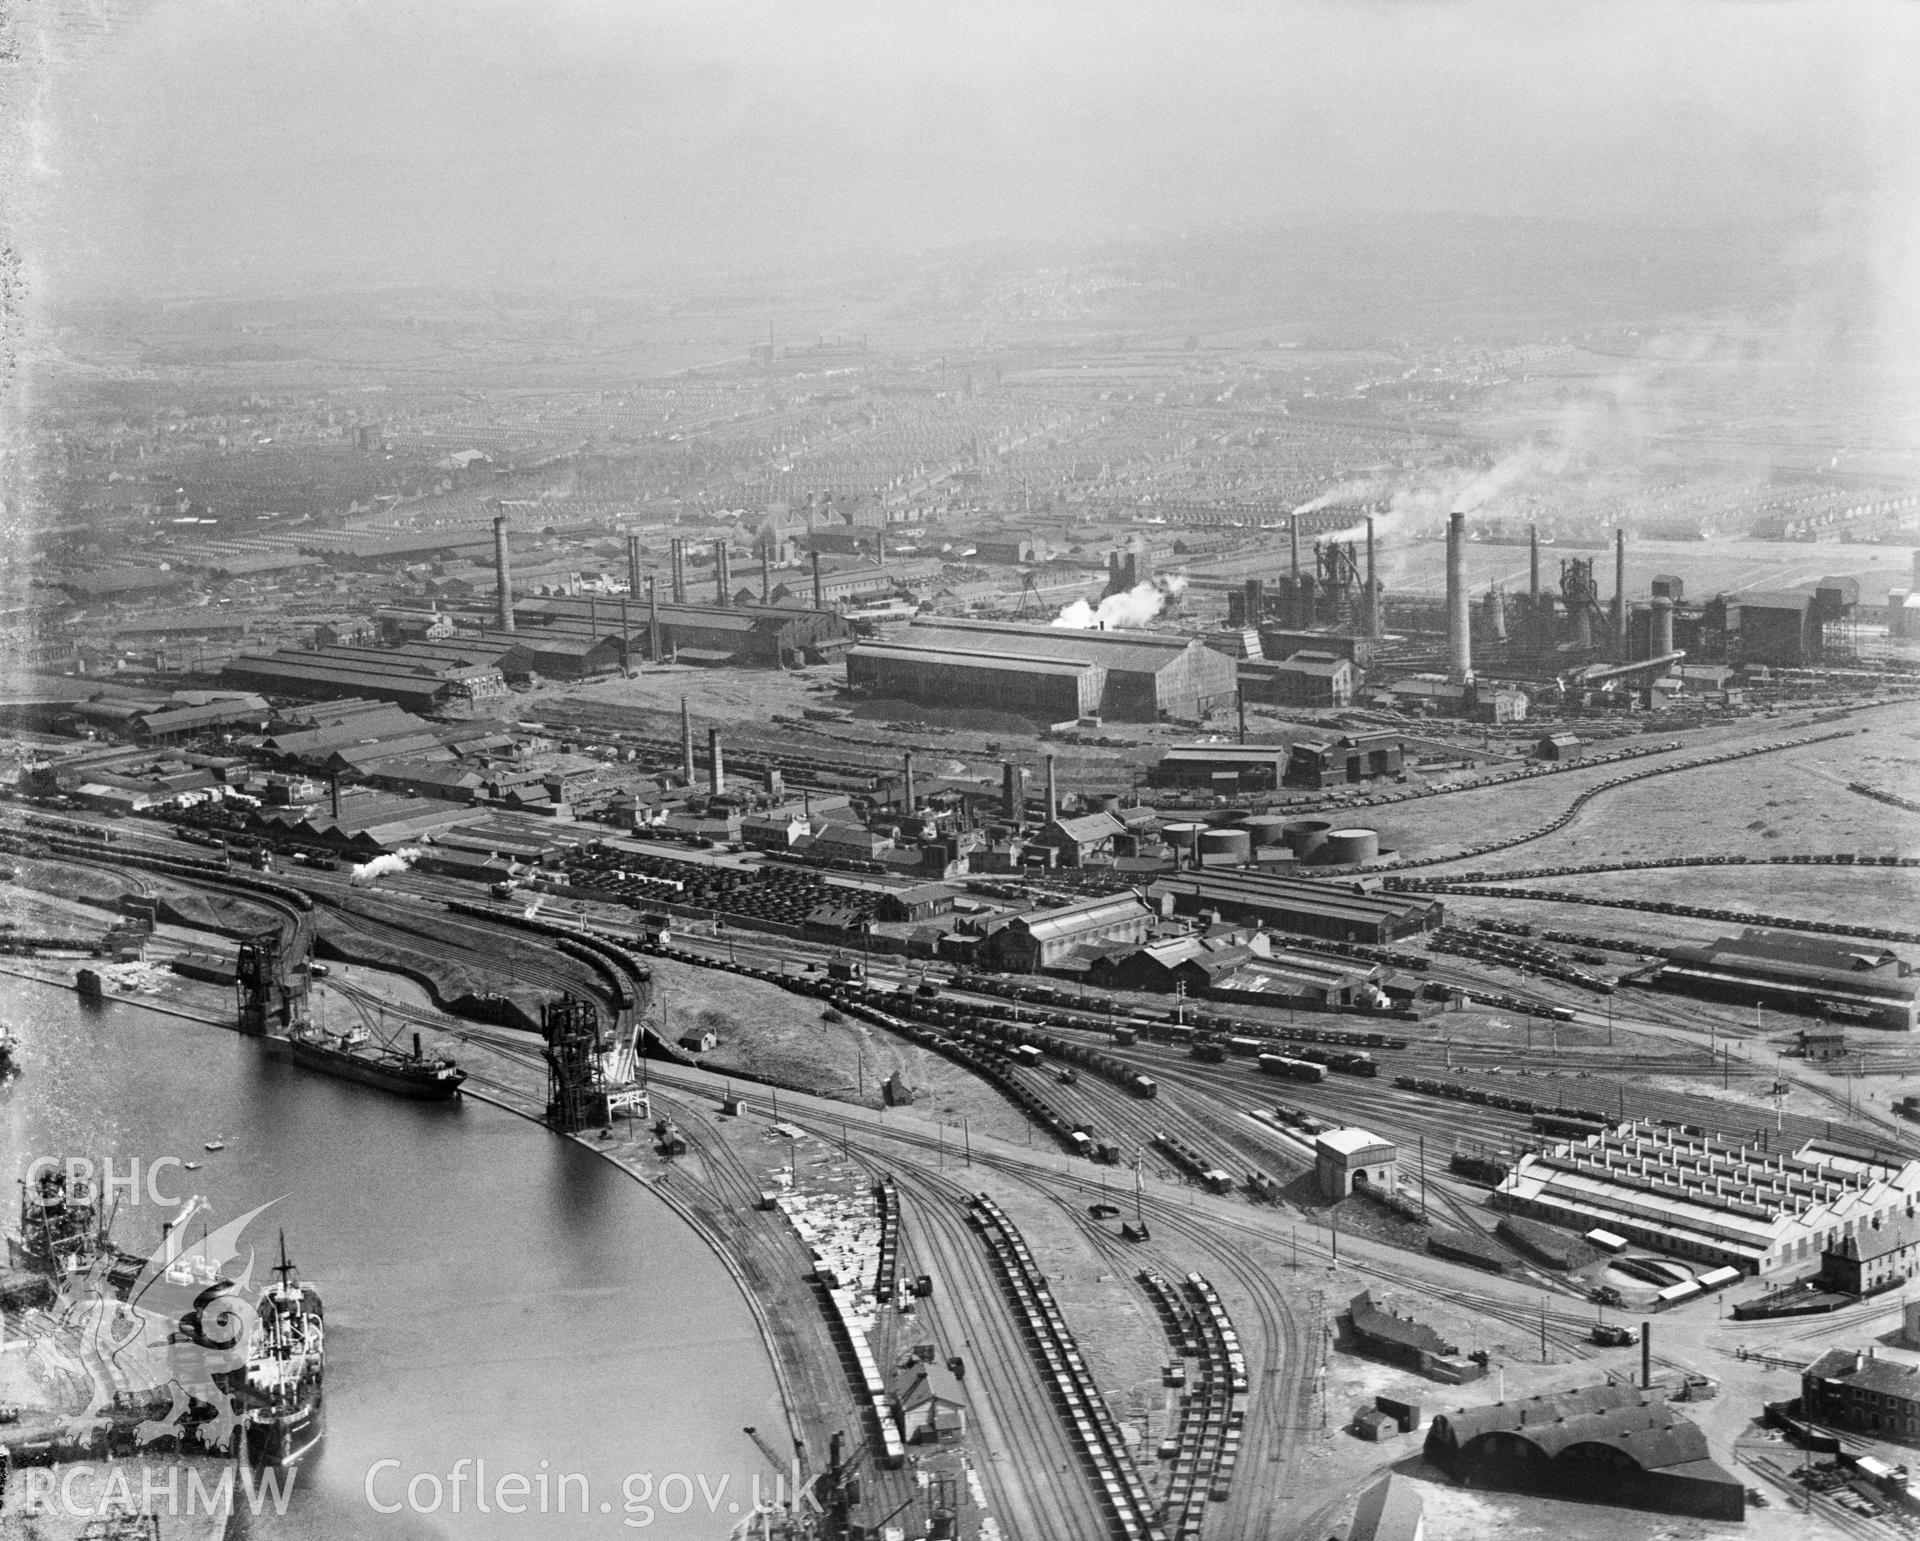 Digital copy of a black and white, oblique aerial photograph of East Moors Steelworks, Cardiff. The photograph shows the view from the South. Dowlais Iron Works moved their main production site from Merthyr Tydfil to Cardiff in 1890 for more convenient access to the docks. The works closed in 1978 and the site has since been demolished and partly redeveloped.